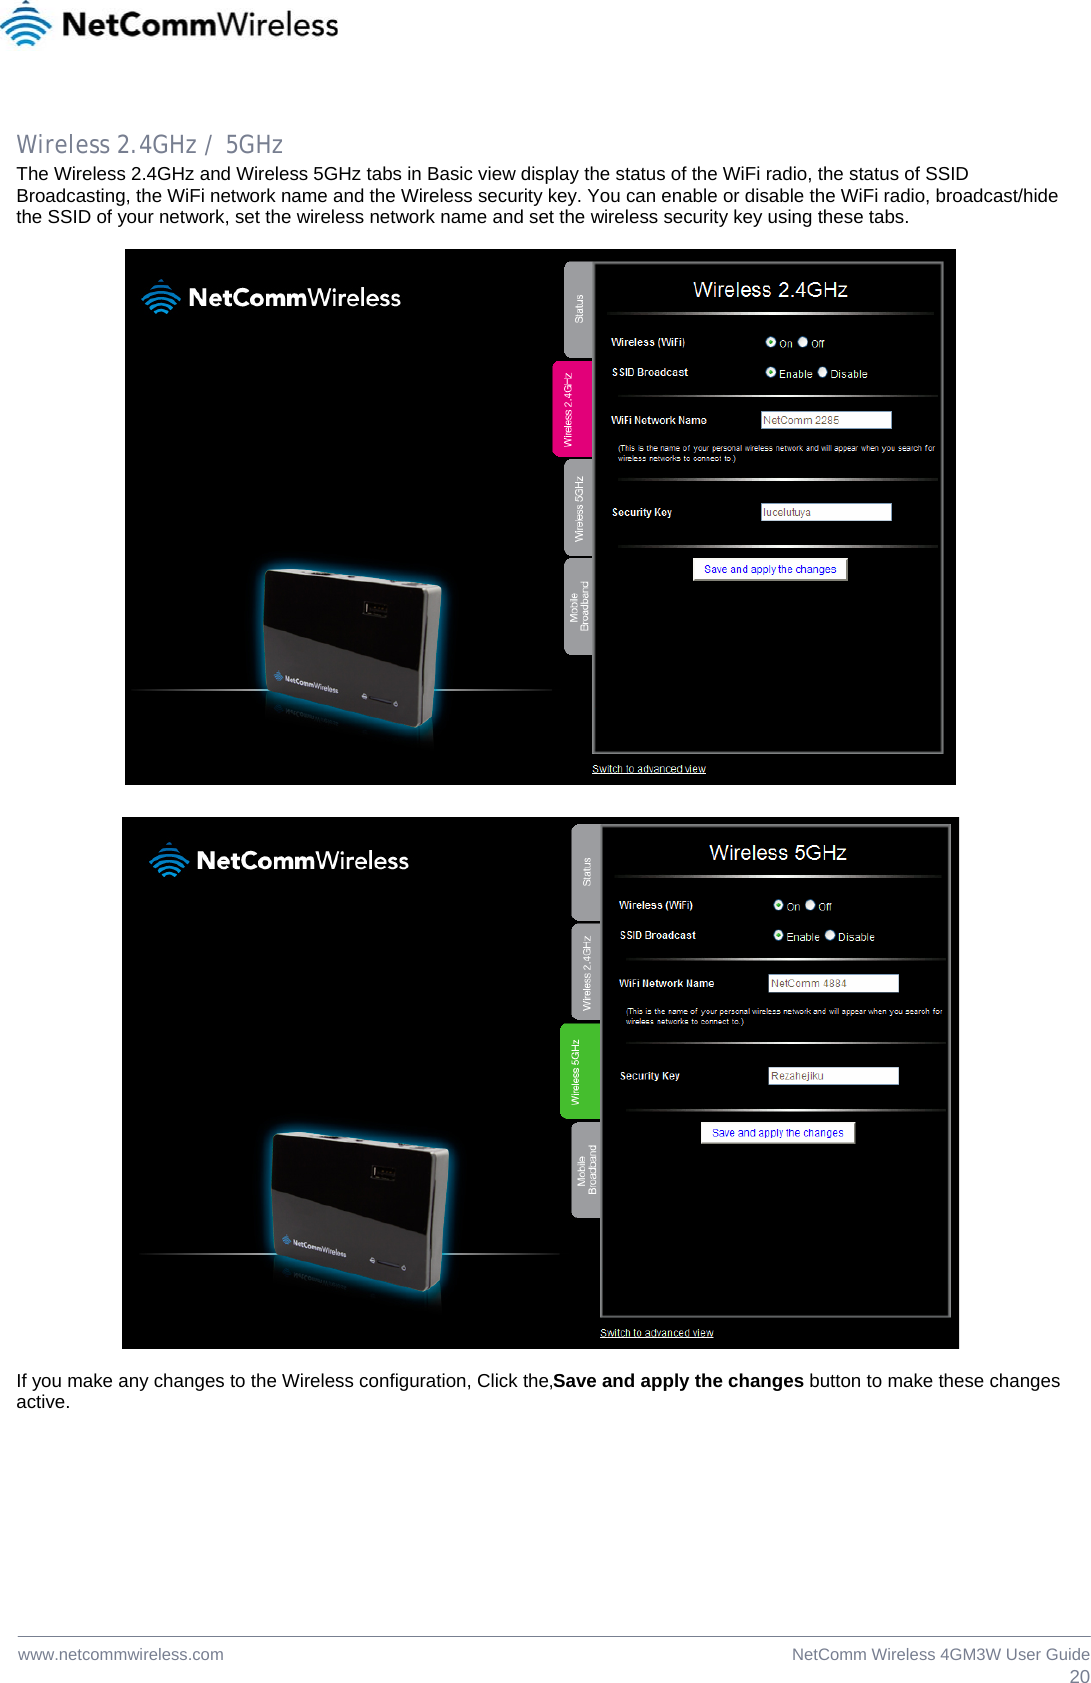  20NetComm Wireless 4GM3W User Guidewww.netcommwireless.com  Wireless 2.4GHz / 5GHz The Wireless 2.4GHz and Wireless 5GHz tabs in Basic view display the status of the WiFi radio, the status of SSID Broadcasting, the WiFi network name and the Wireless security key. You can enable or disable the WiFi radio, broadcast/hide the SSID of your network, set the wireless network name and set the wireless security key using these tabs.      If you make any changes to the Wireless configuration, Click the‚Save and apply the changes button to make these changes  active.  